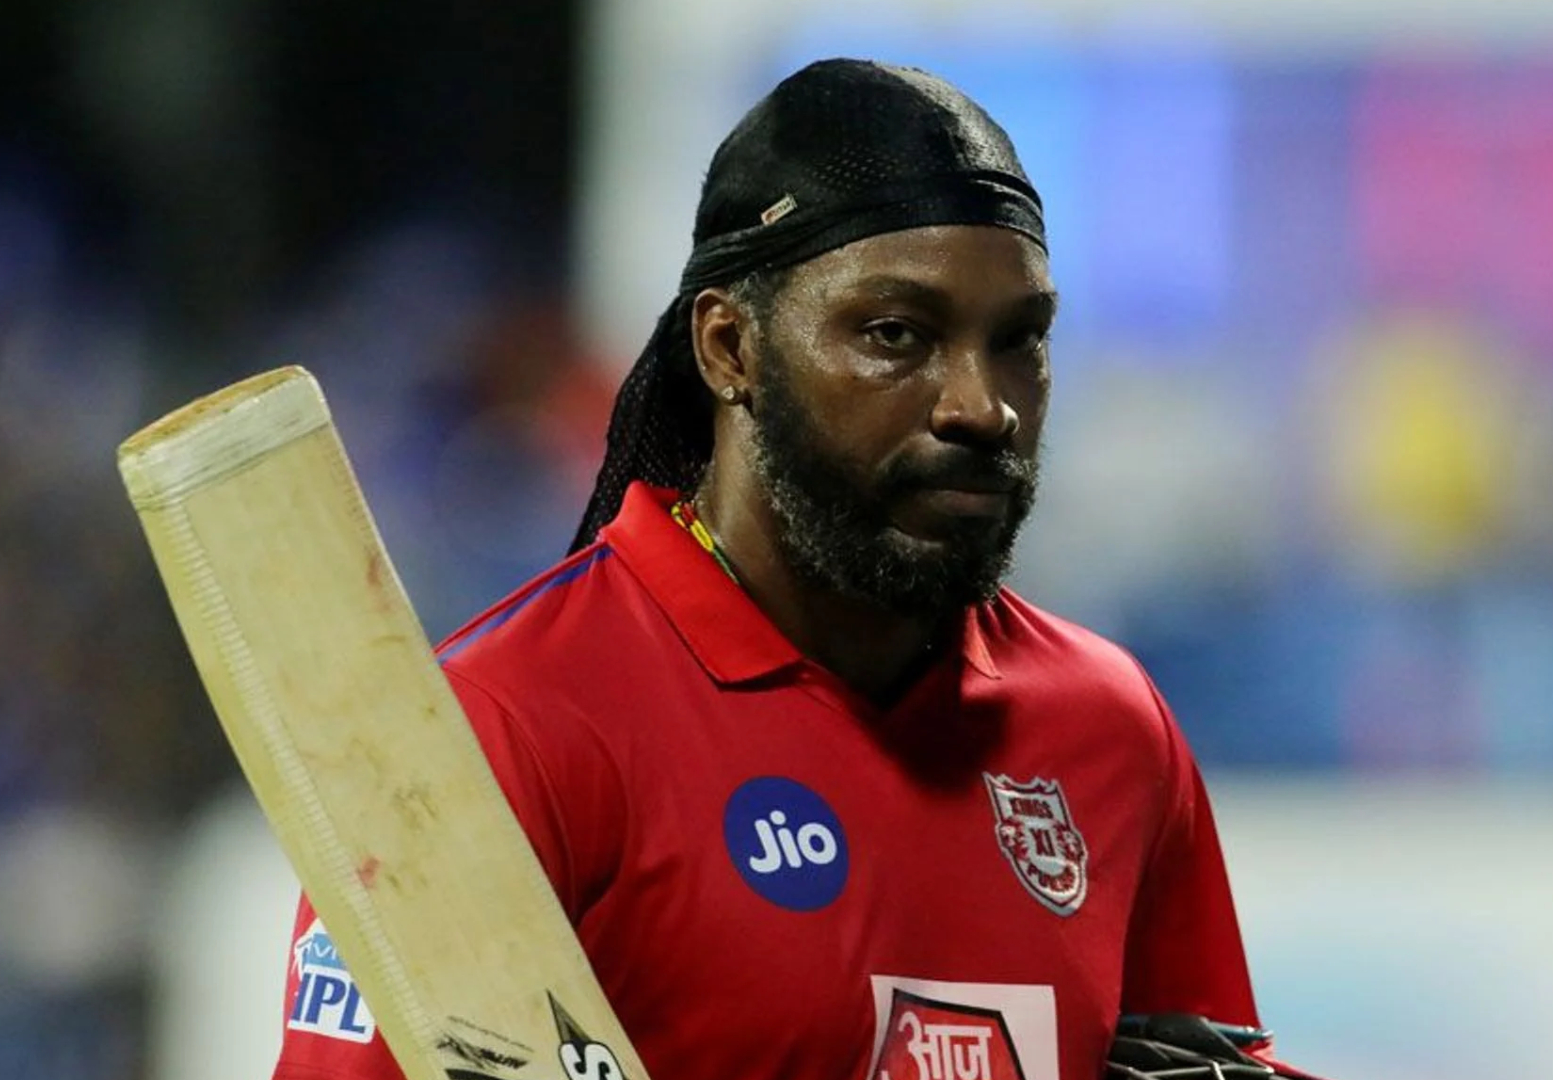 IPL2020 KXIP Chris Gayle Was Pinched After Benched For Long Ganguly